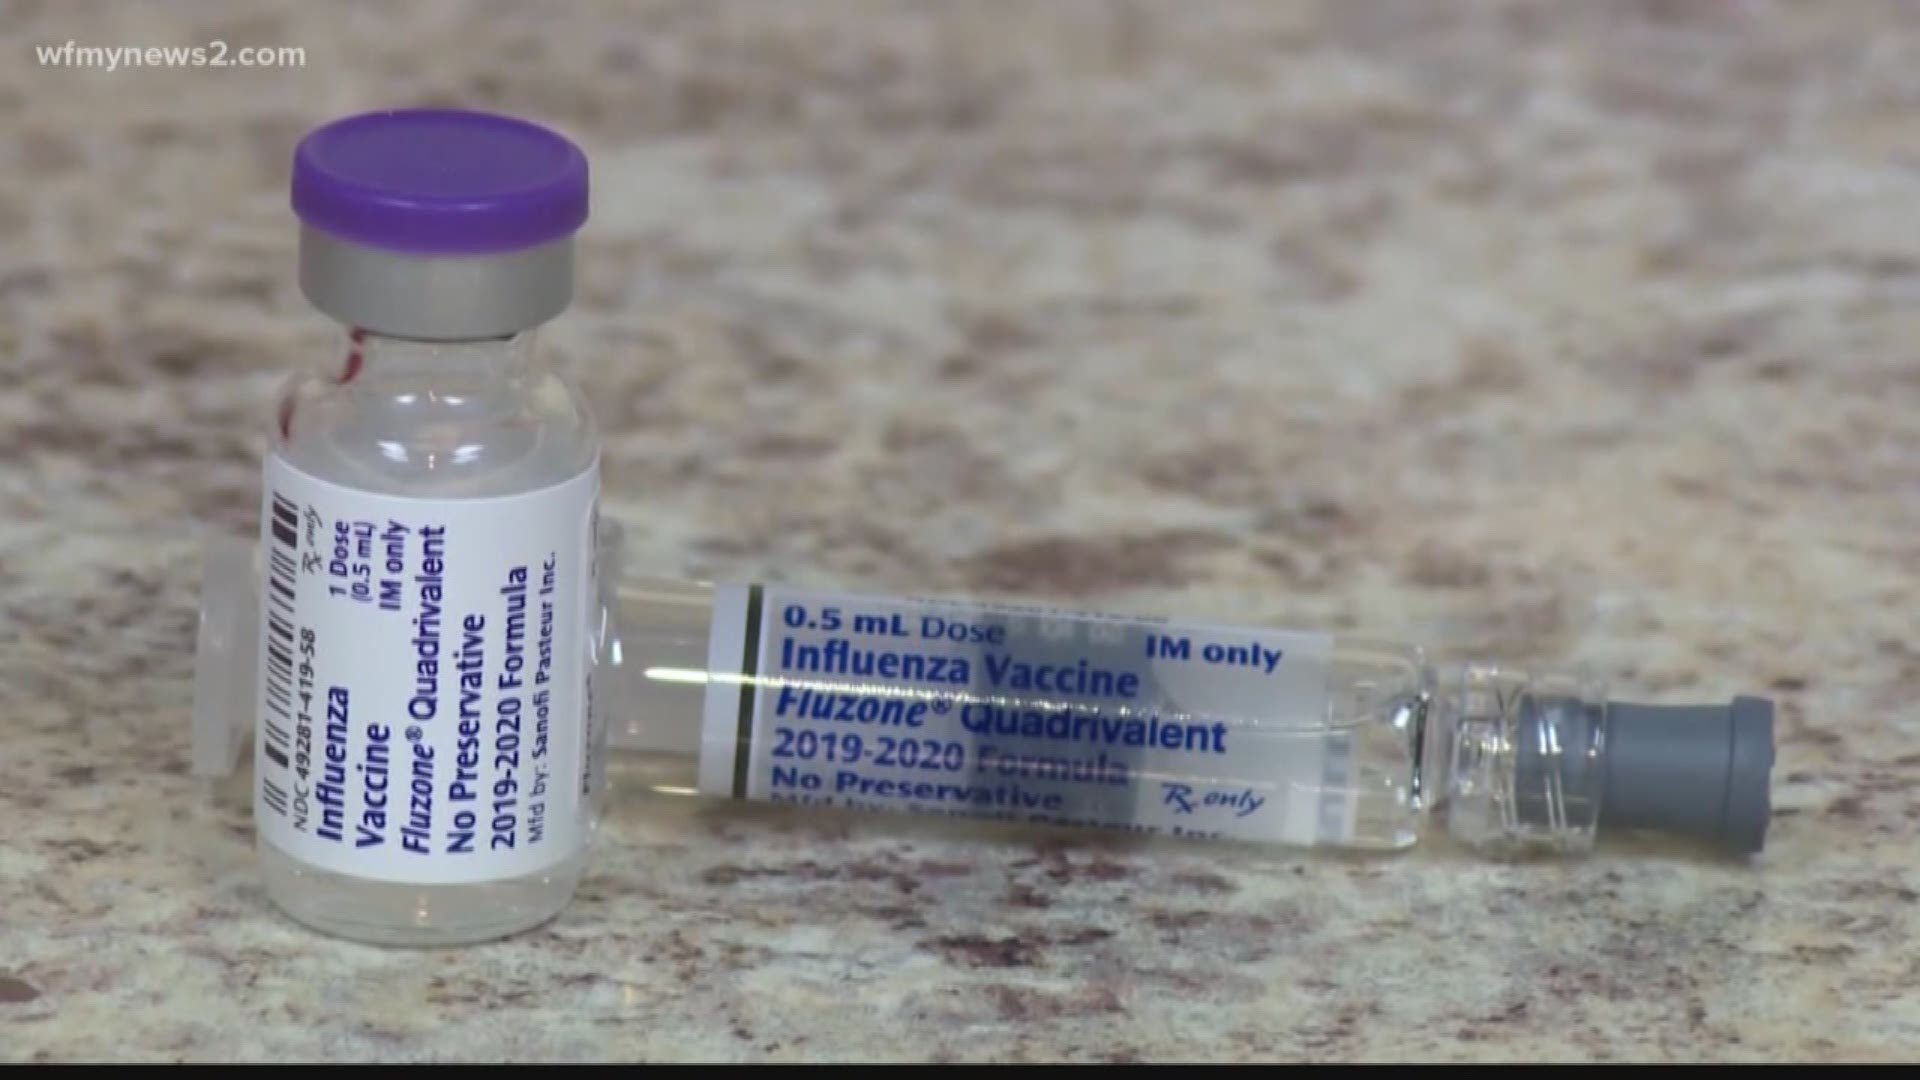 North Carolina health officials say 11 more people died of complications from the flu last week, including a victim between the ages of 5 and 17 years old.